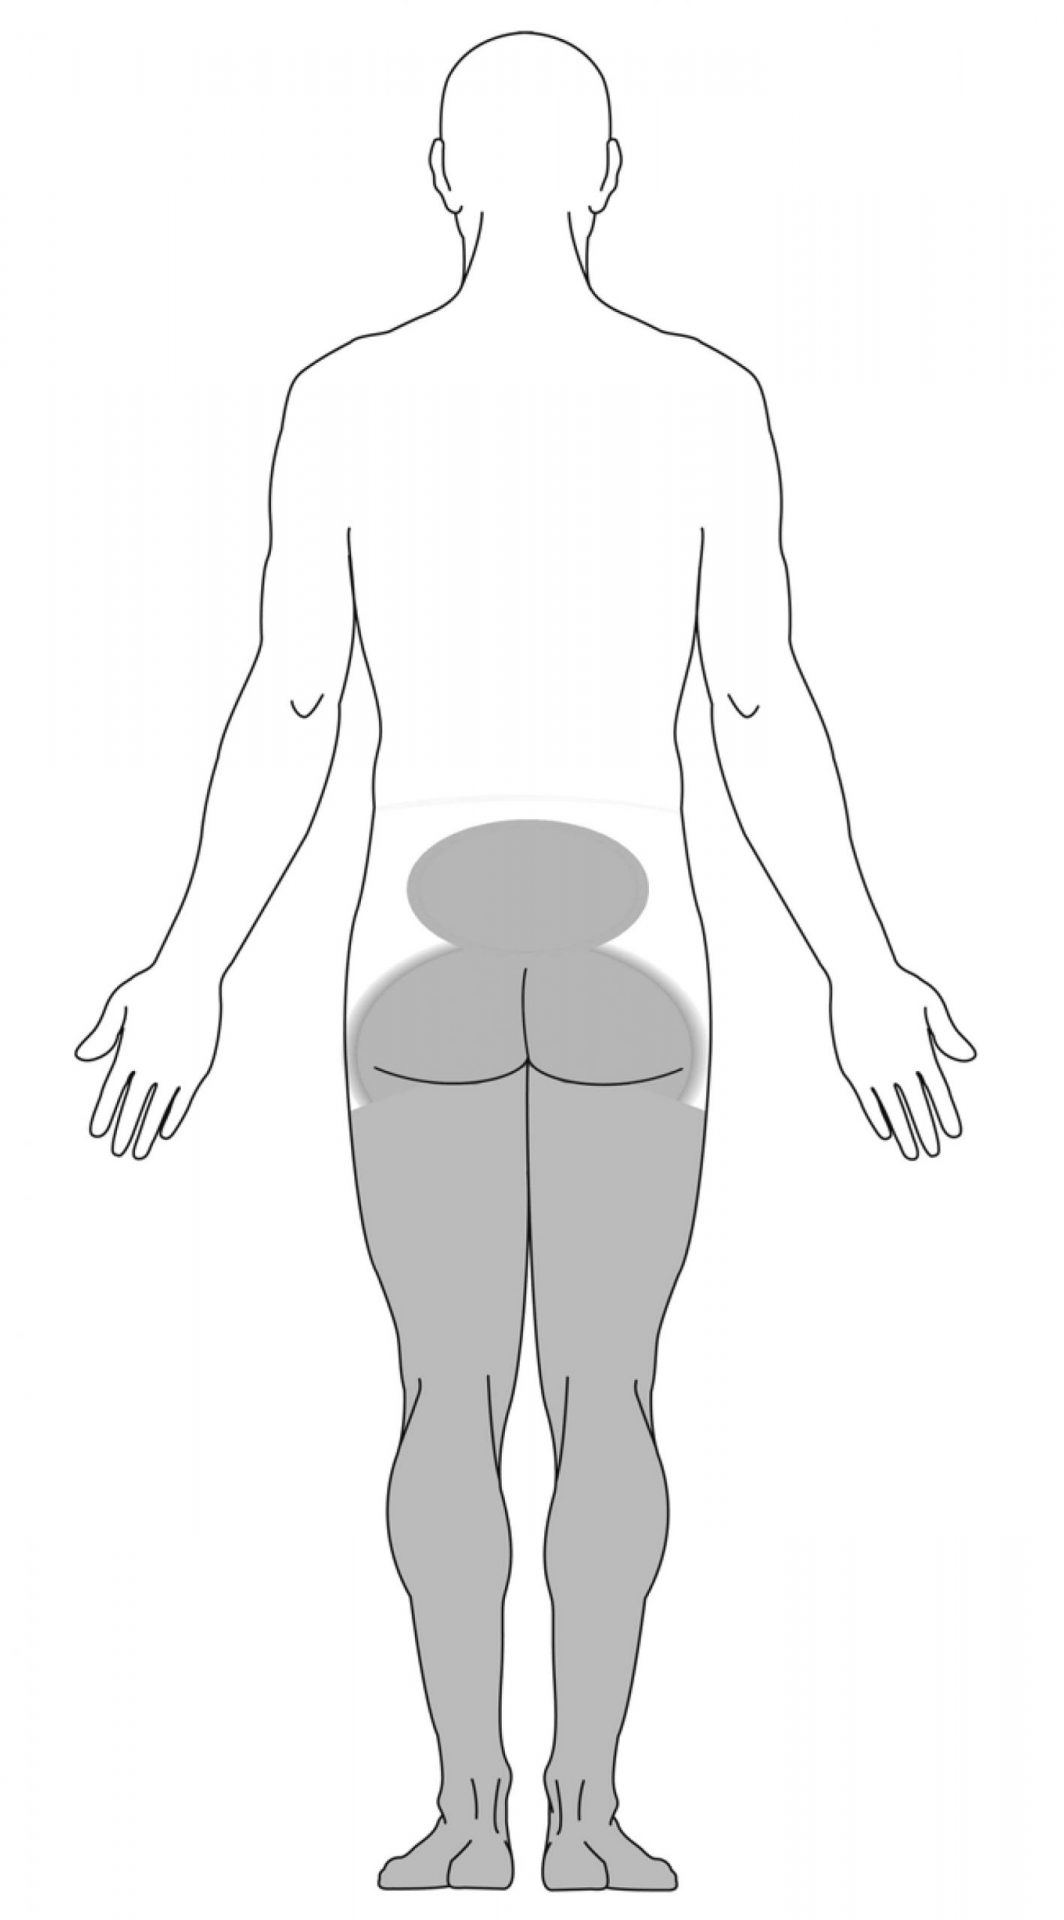 symptoms in the legs due to cauda equina syndrome